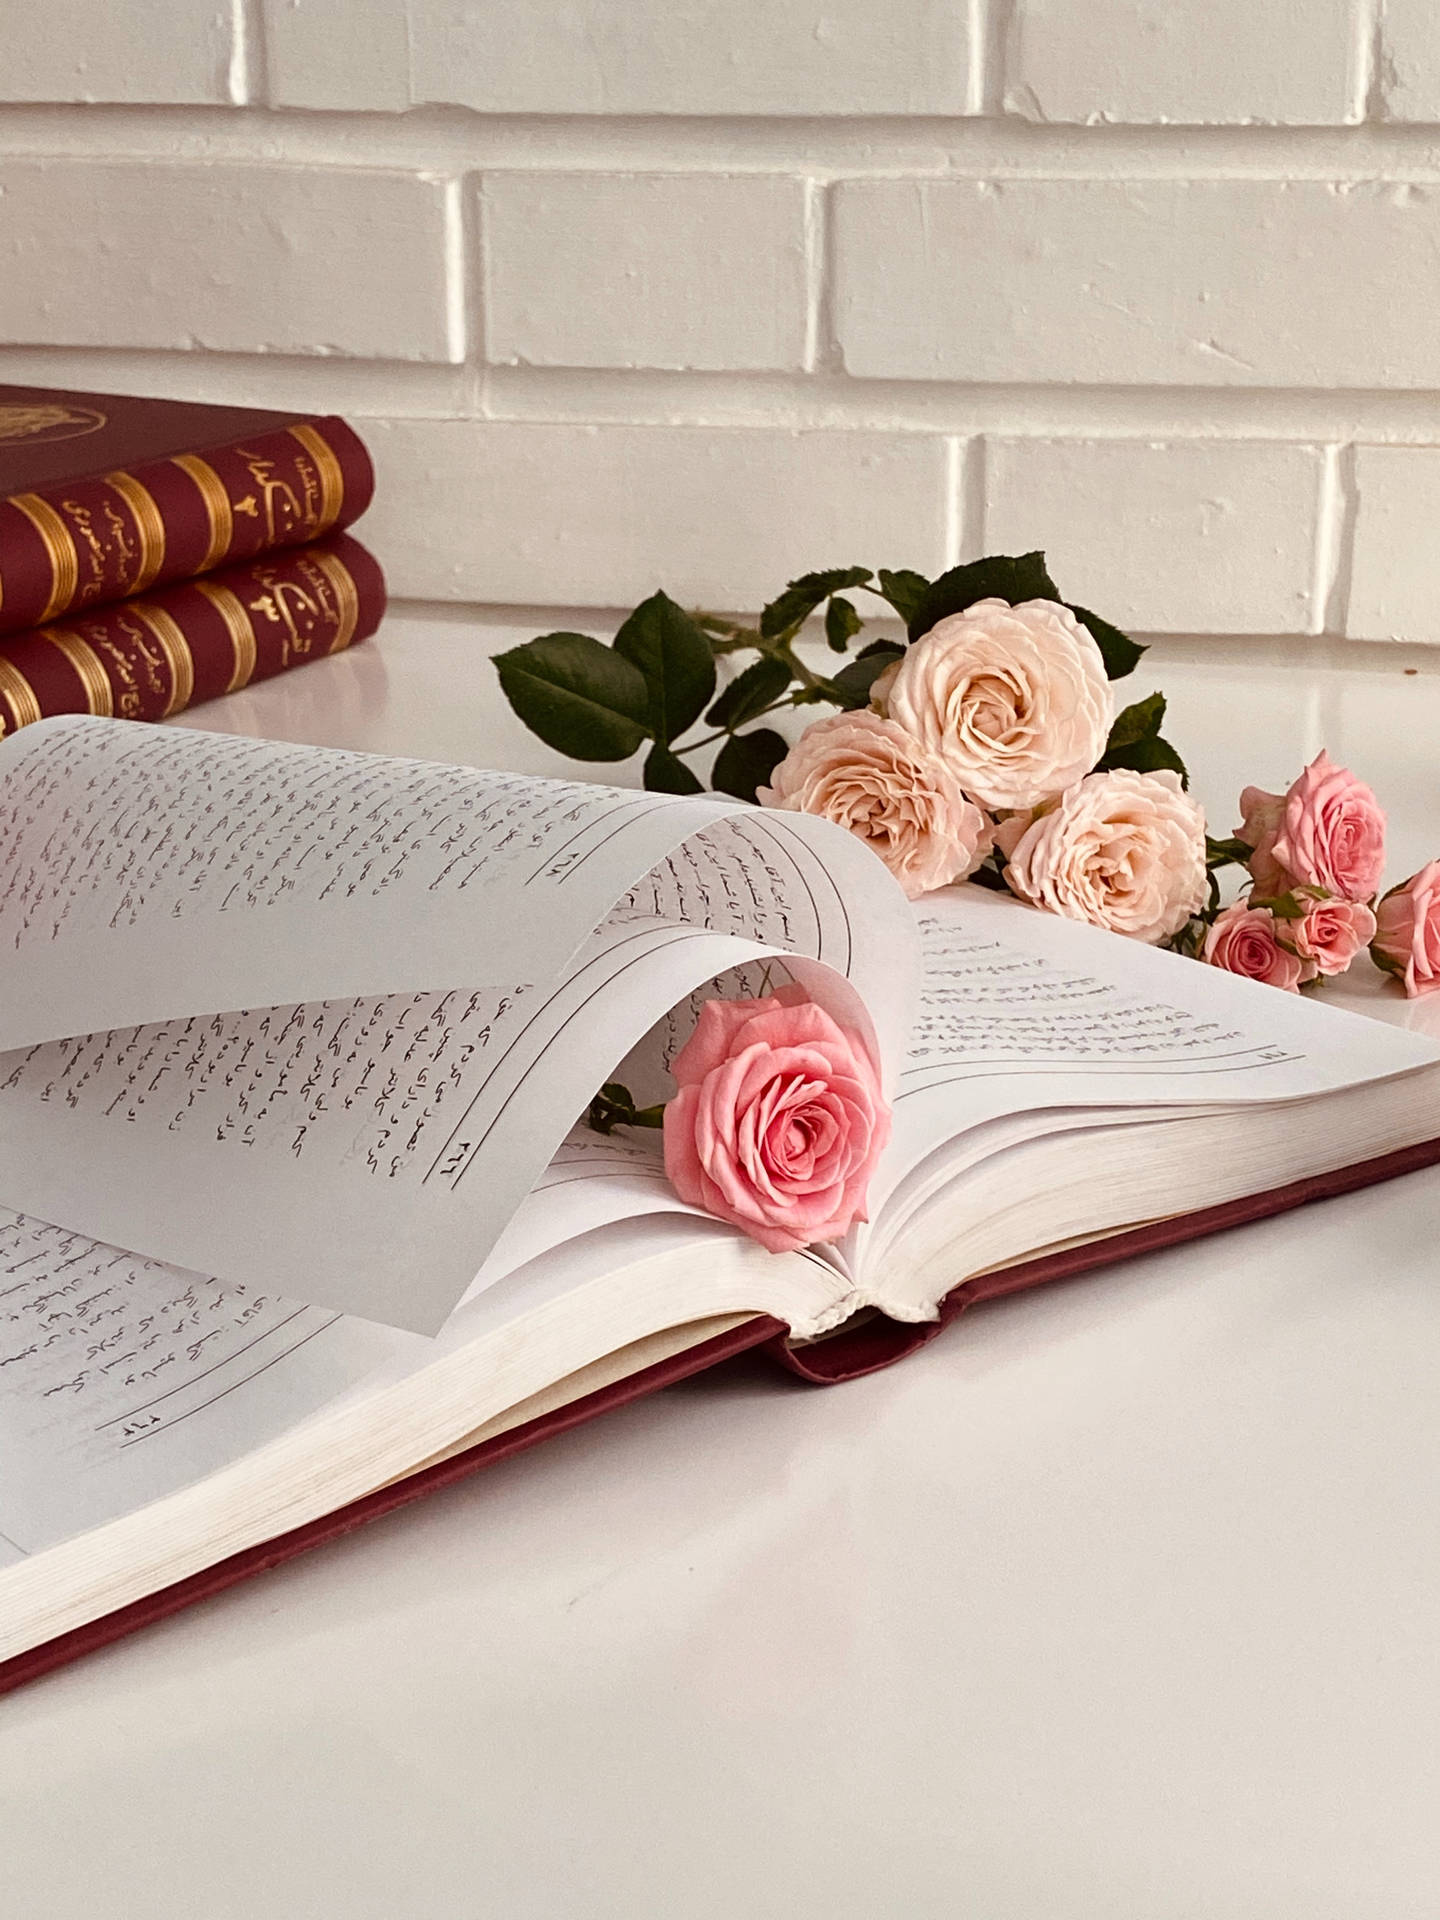 An open book with pink roses on top - Books